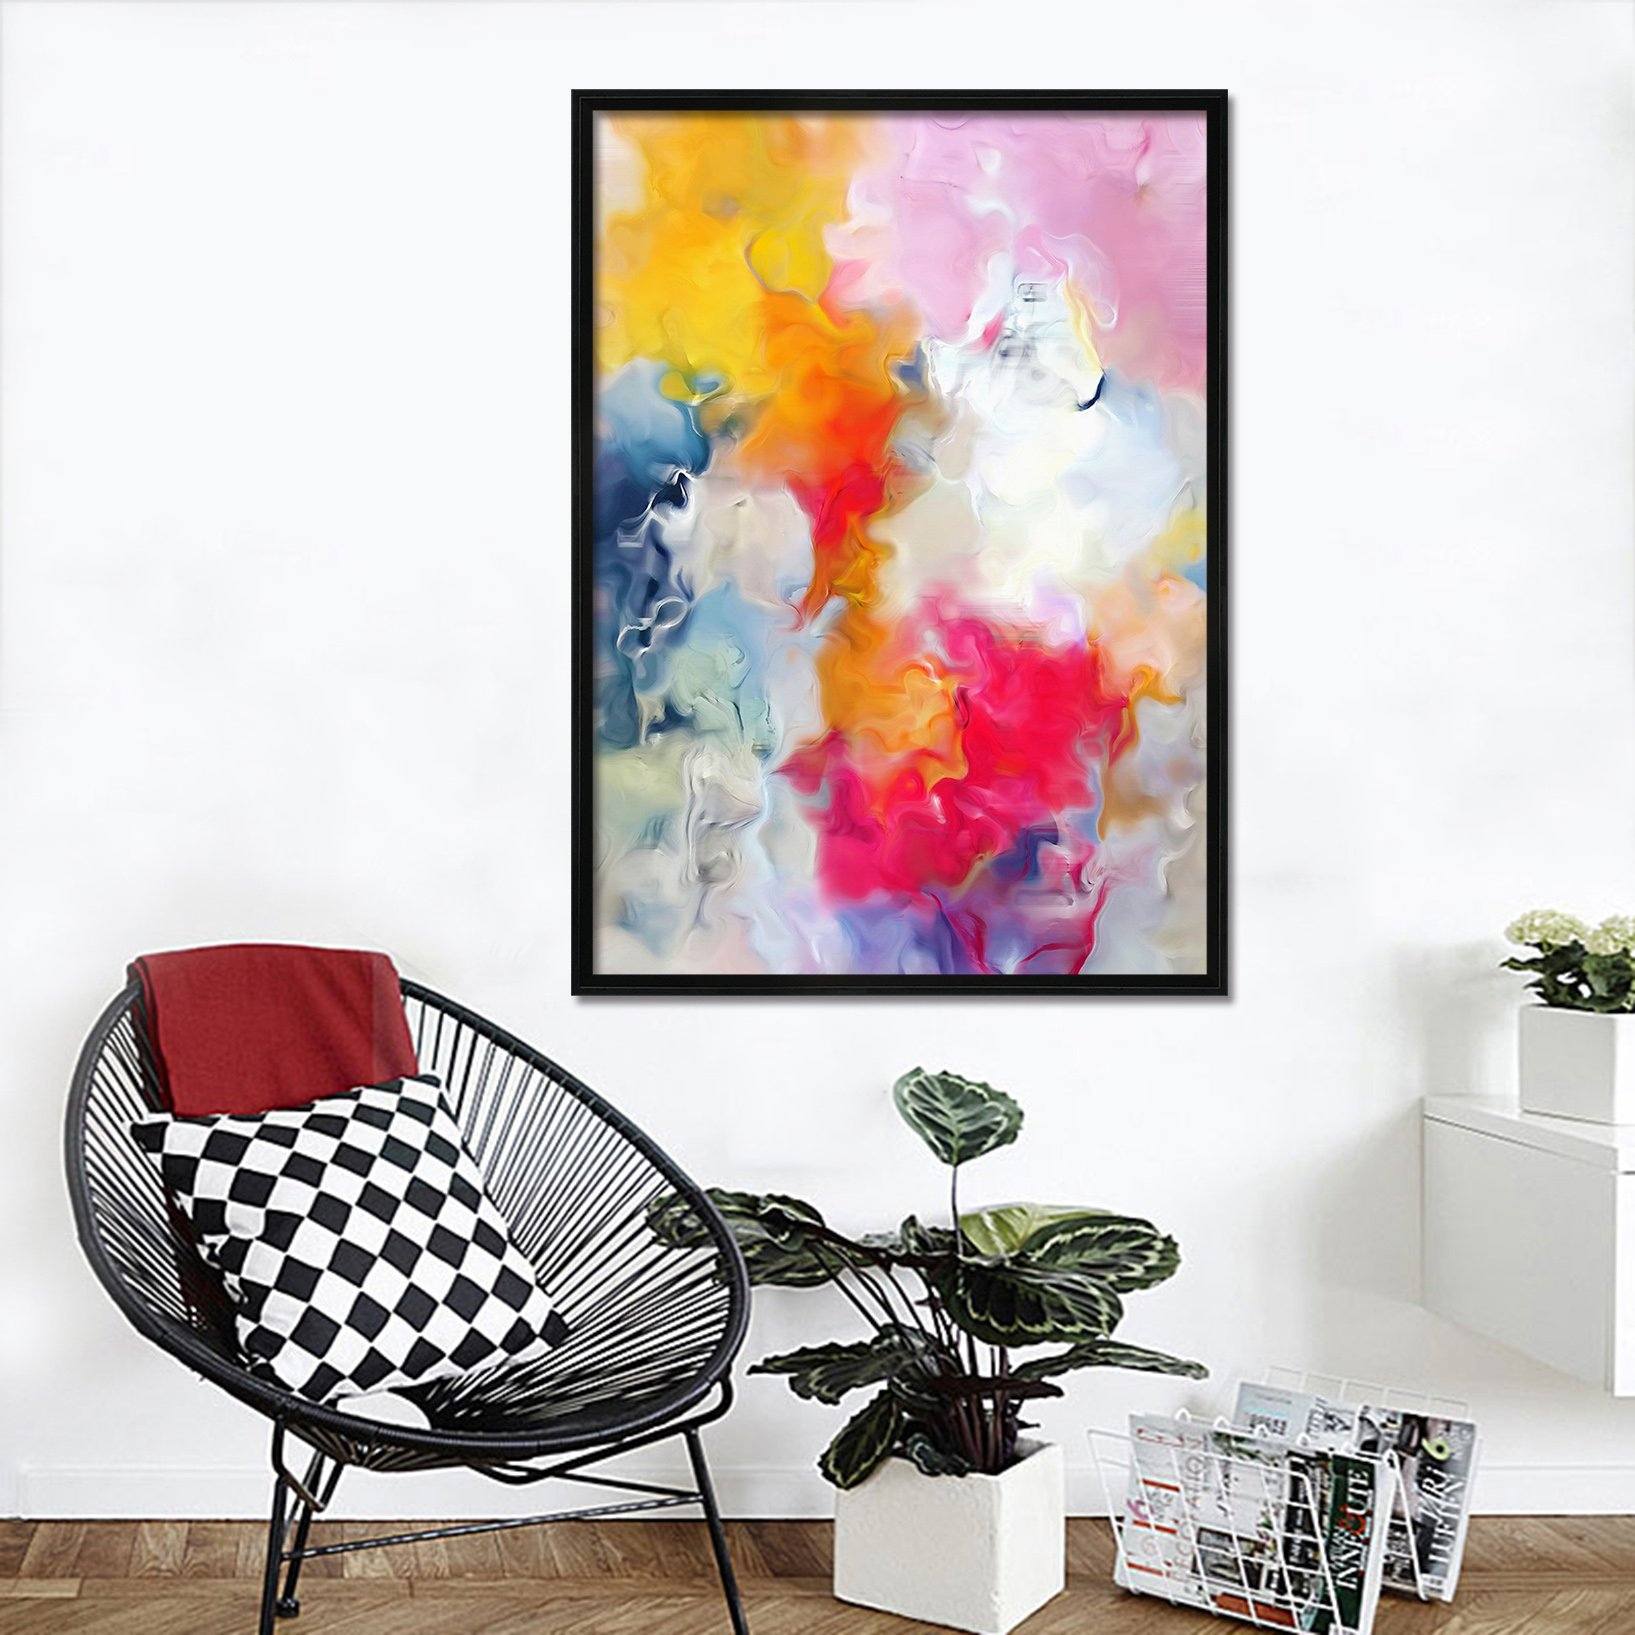 3D Colorful Doodle 070 Fake Framed Print Painting Wallpaper AJ Creativity Home 